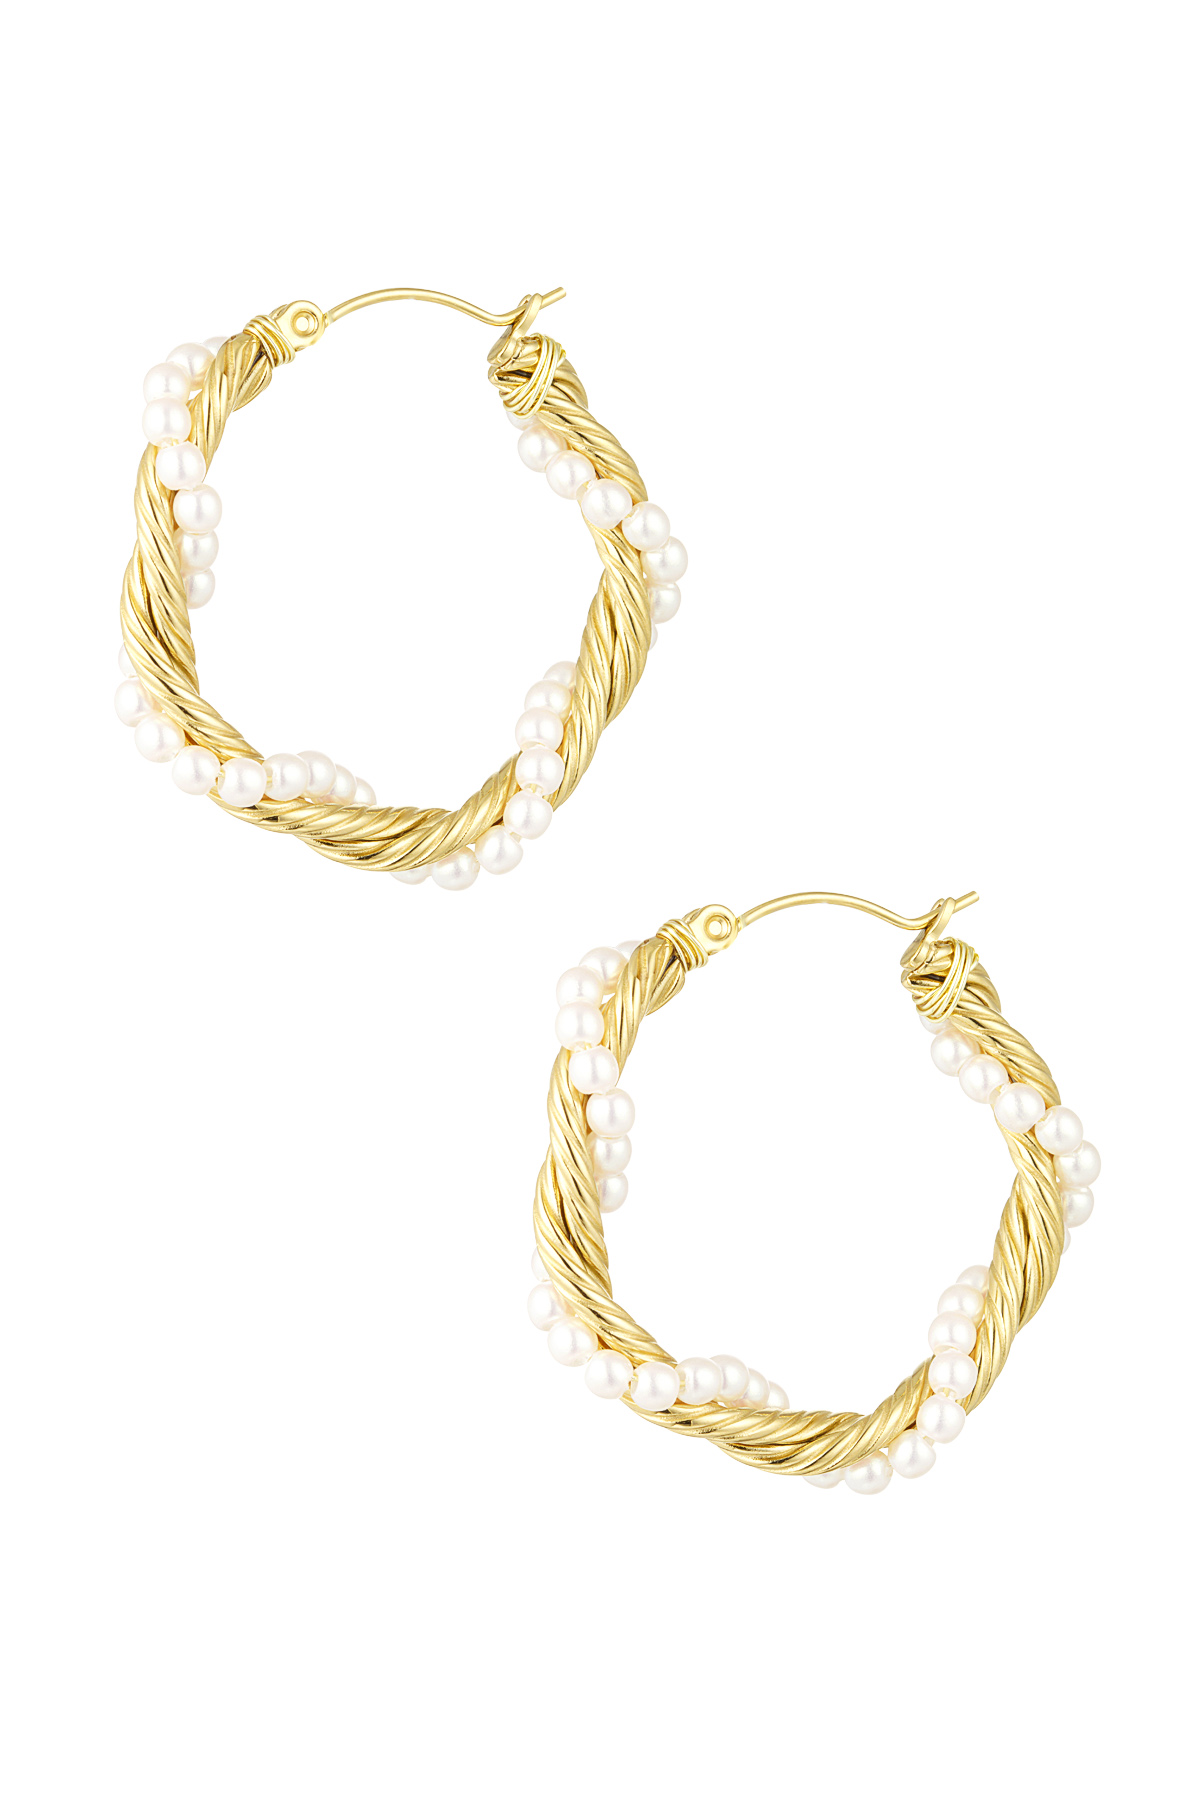 Round twisted rope earrings with pearls - gold 